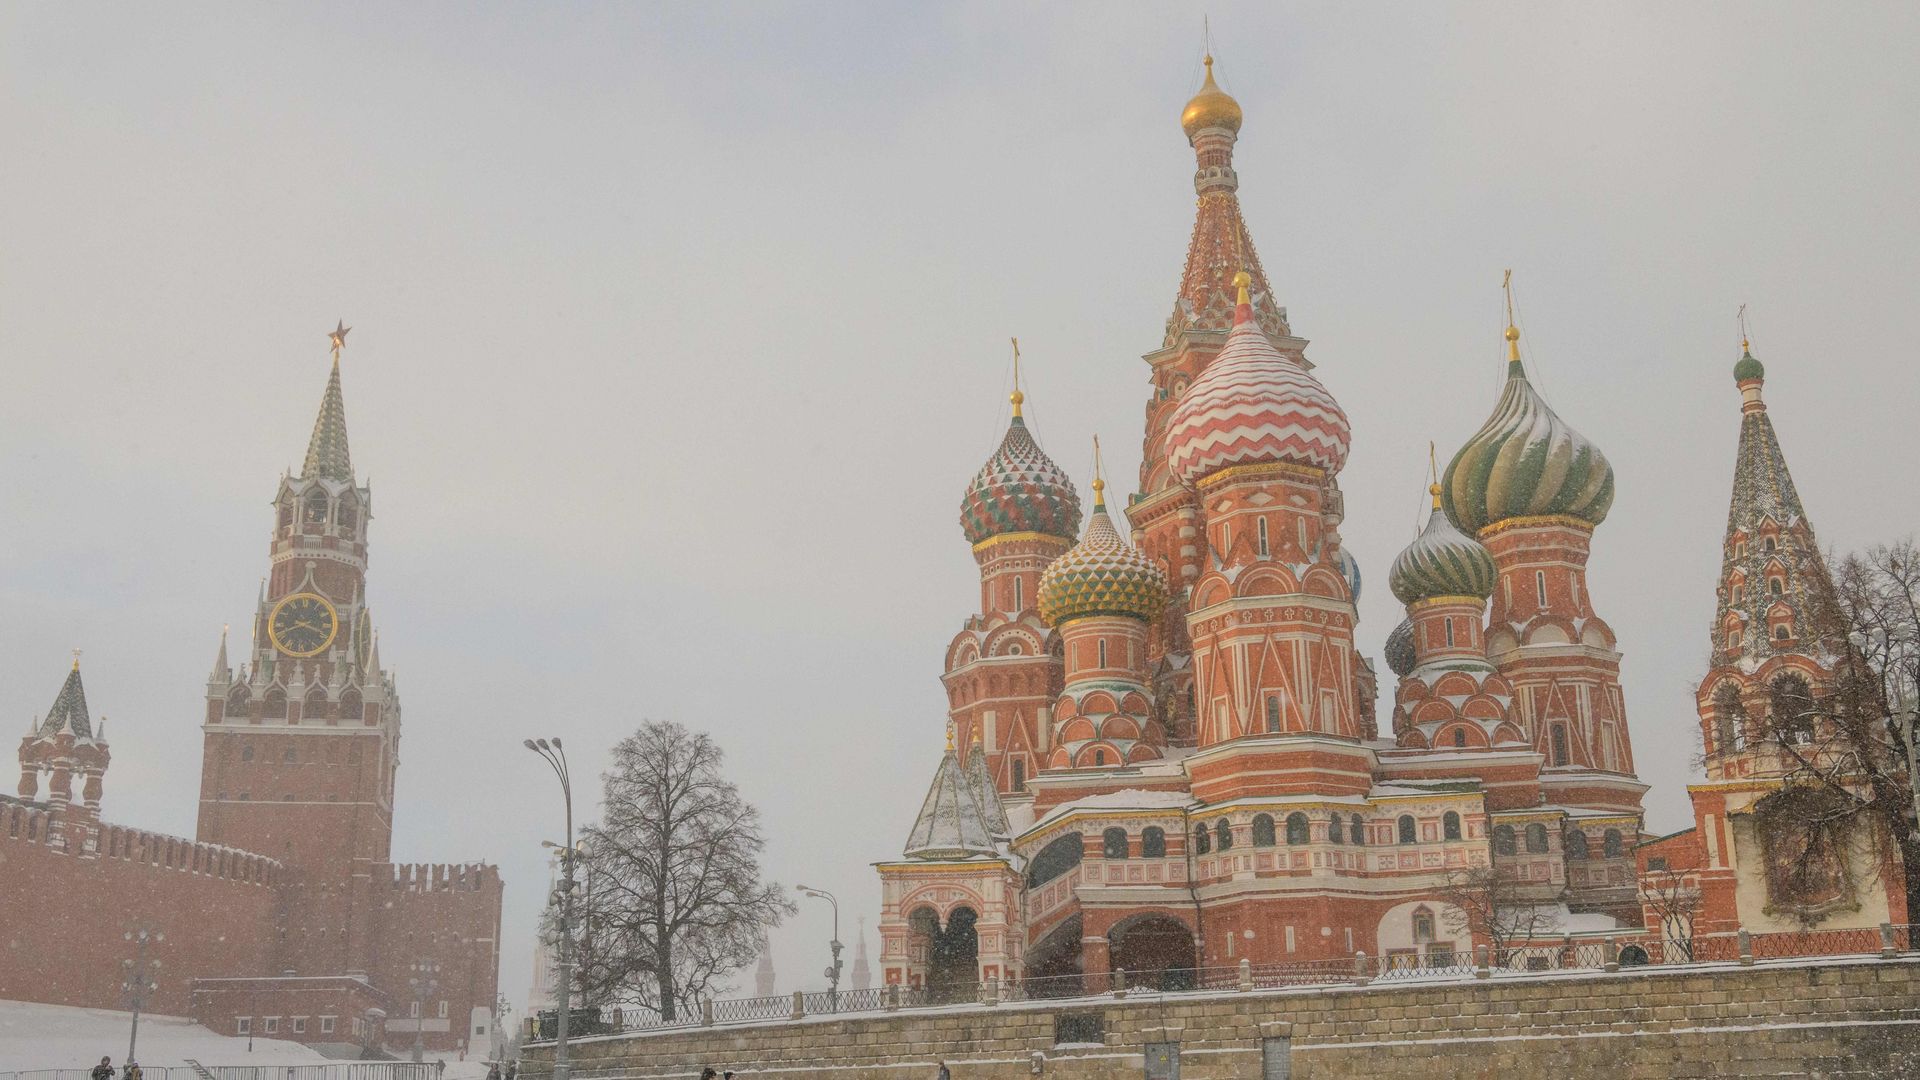 St. Basil's Cathedral and the Kremlin in the snow.